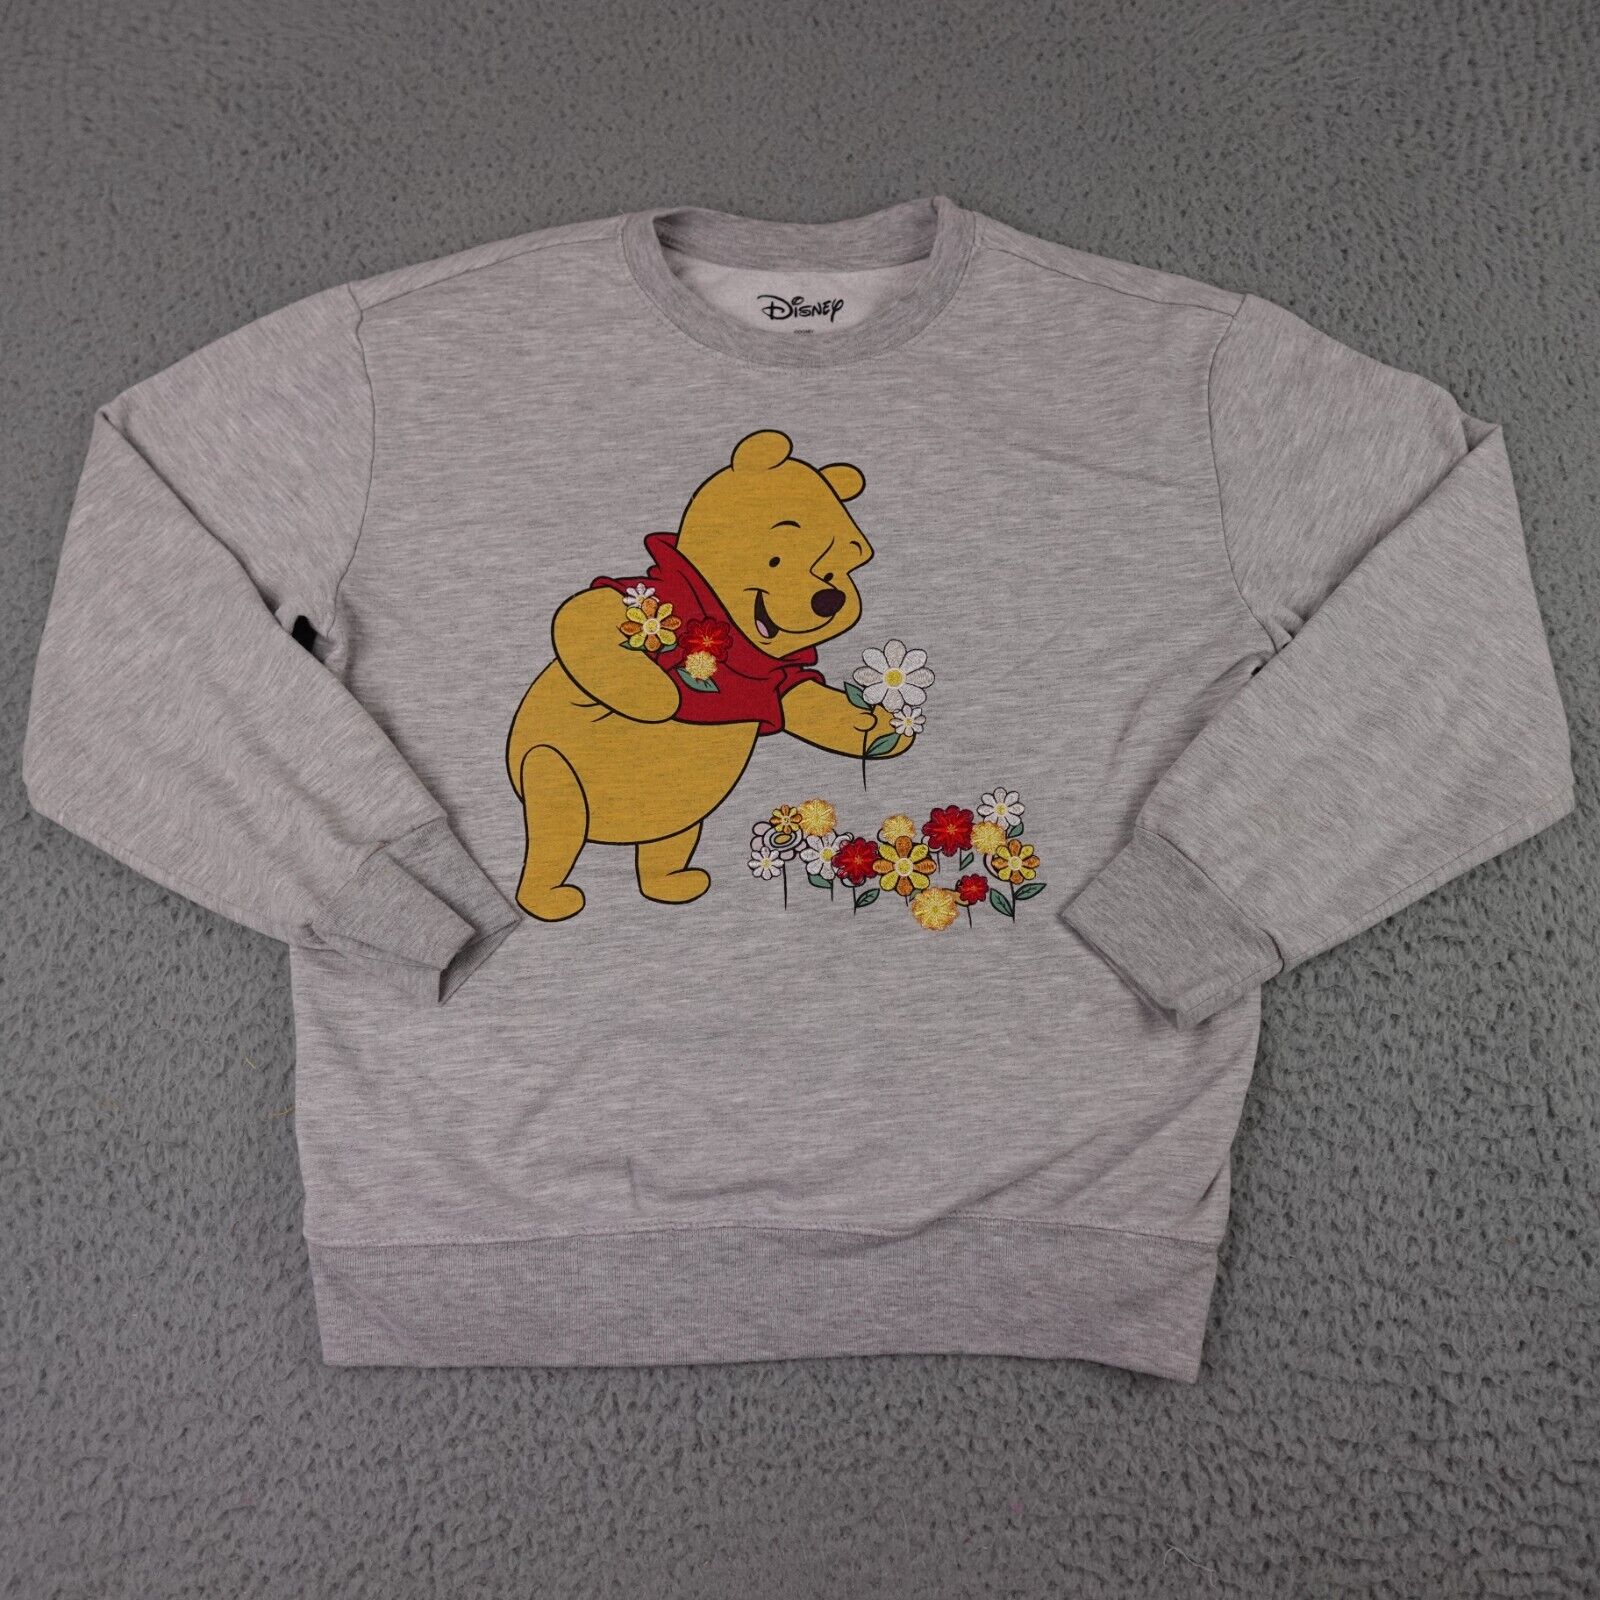 Disney Sweatshirt Mens Small Gray Winnie The Pooh Floral Embroidered Crew Neck